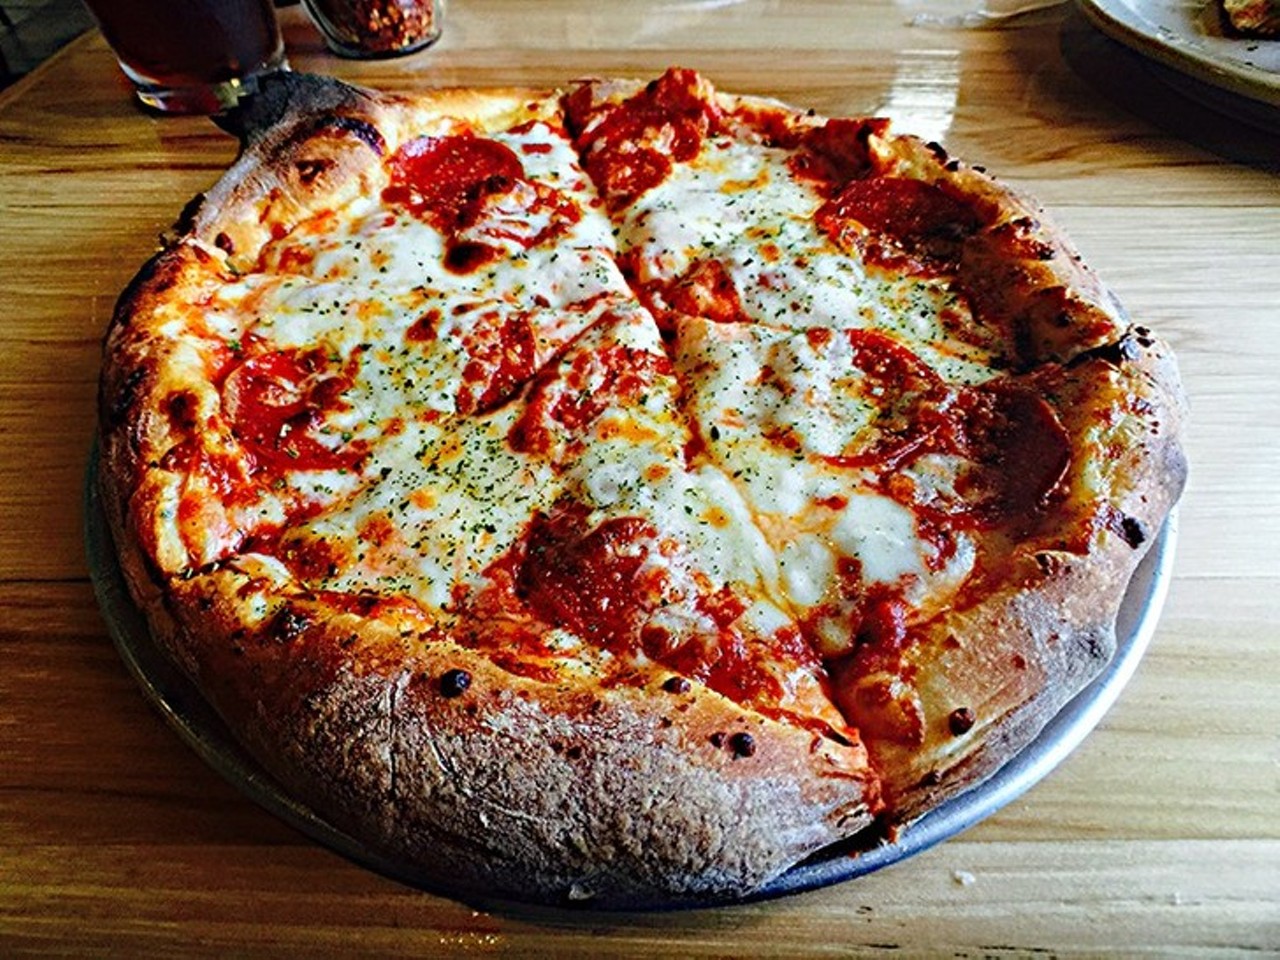 Halftime Pizza
While the enchilada pizza topped with pico de gillo is a fresh addition to an old favorite, owner David Garcia's hospitality was even more refreshing at Halftime Pizza.  
7126 Tezel Road, (210) 521-2990 
Photo via San Antonio Current